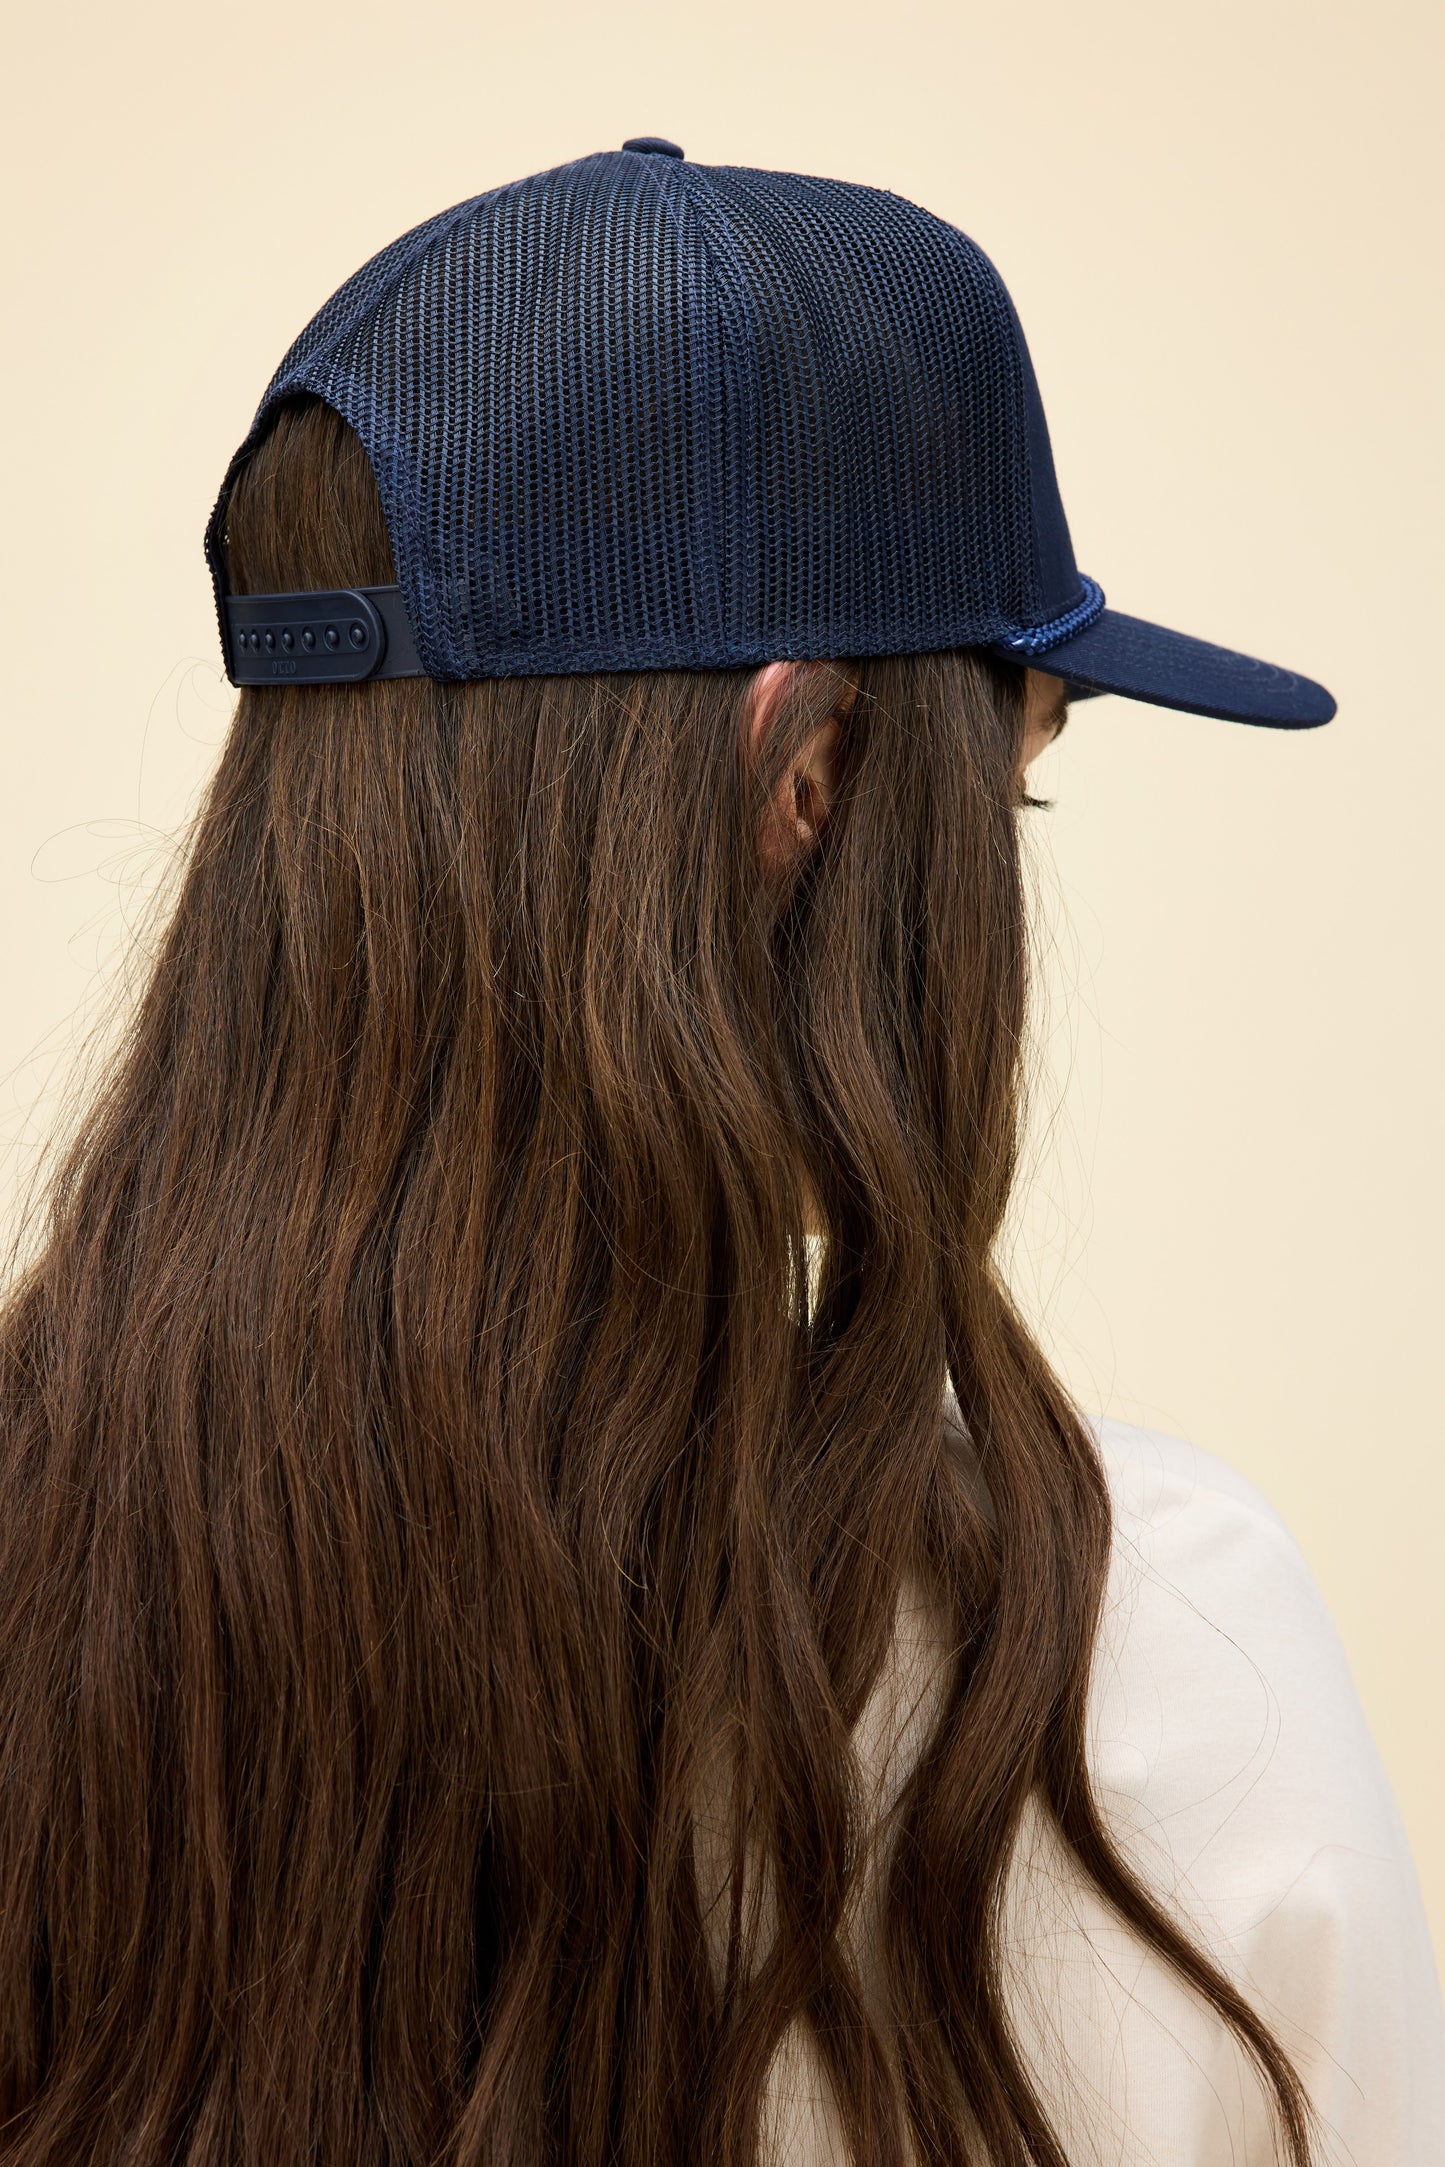 Model wearing a navy blue trucker hat with western-style 'Daydreamer Studios' embroidery on the front.